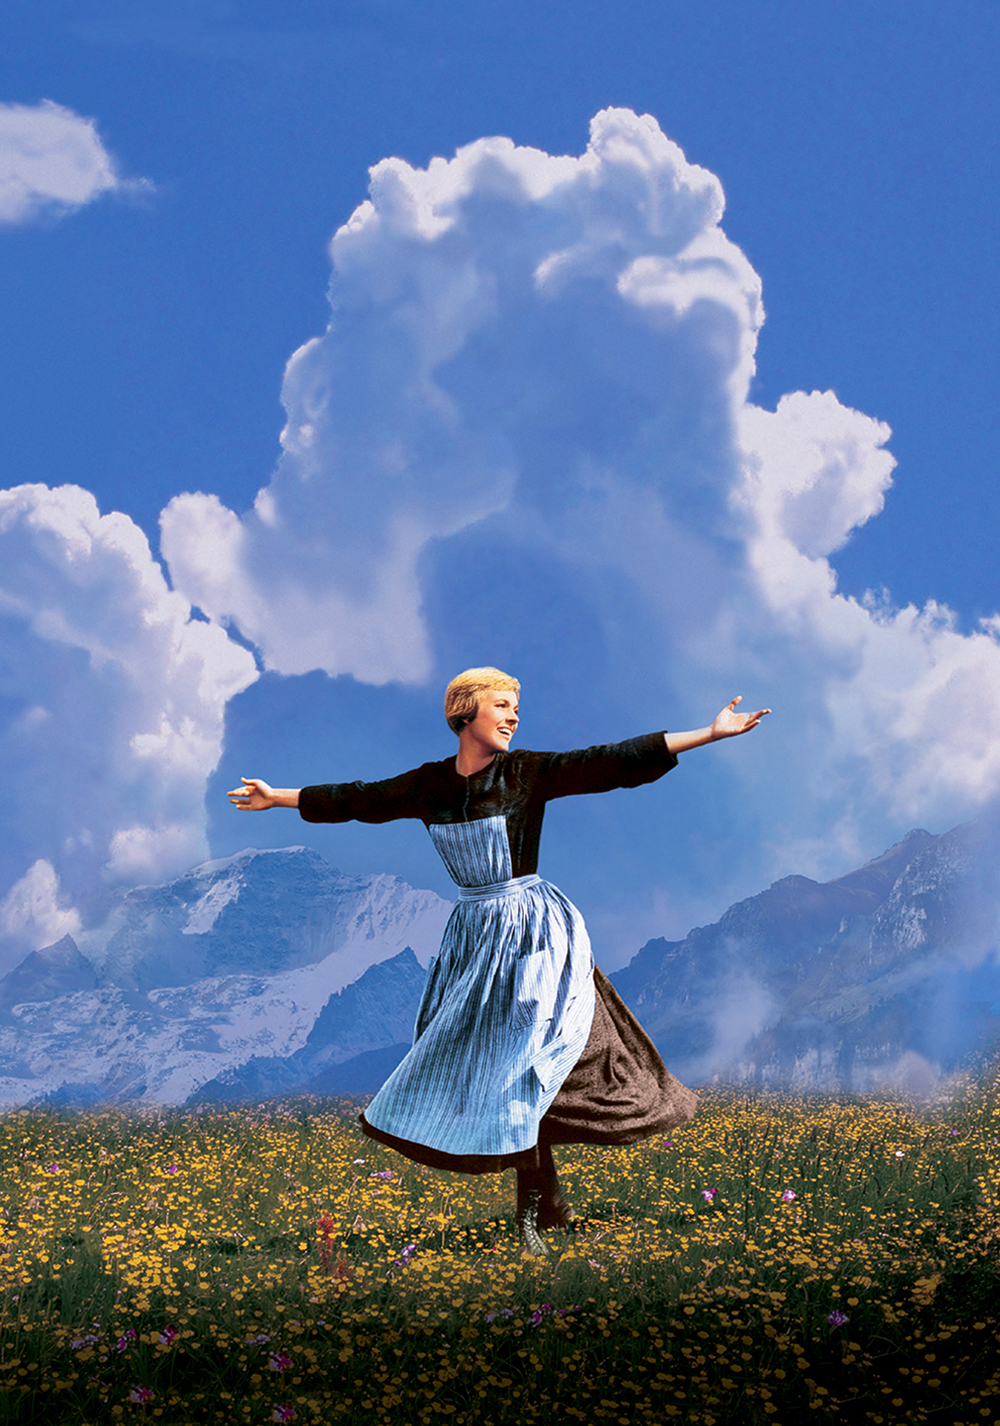 The Sound Of Music Images. 